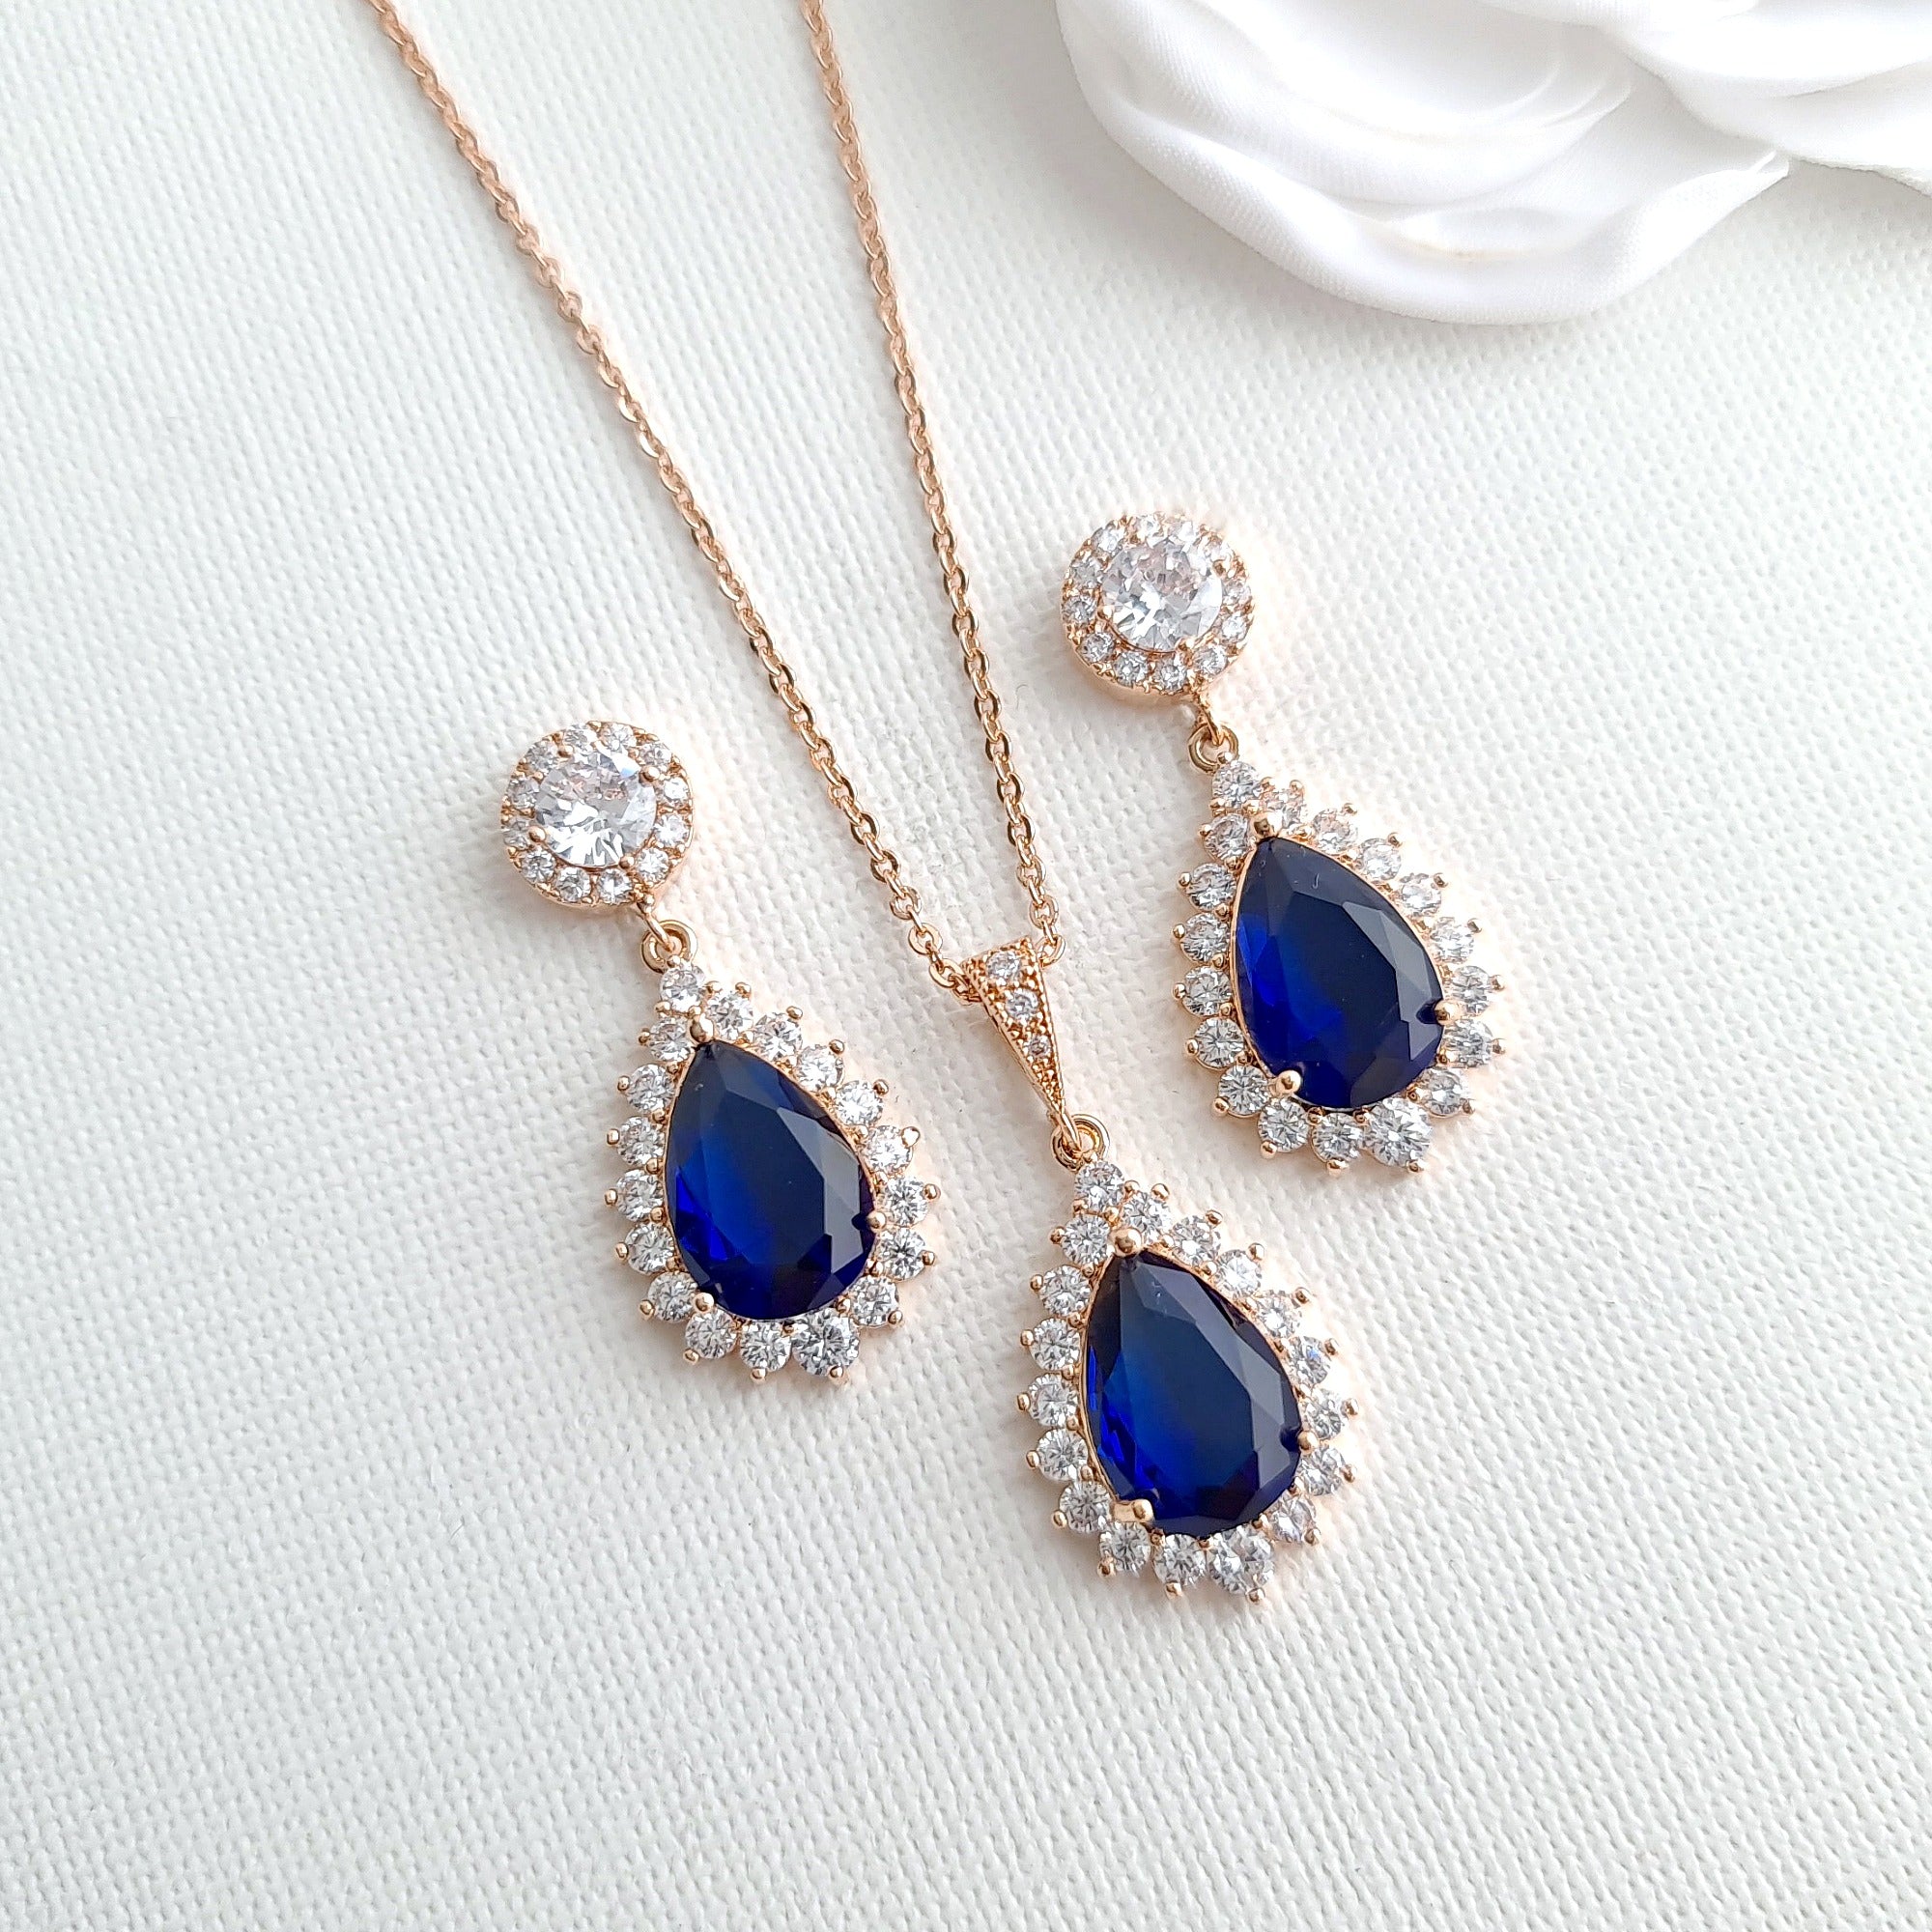 Diamond and Sapphire Oval Pendant Necklace and Earrings Set in 14K Rose Gold